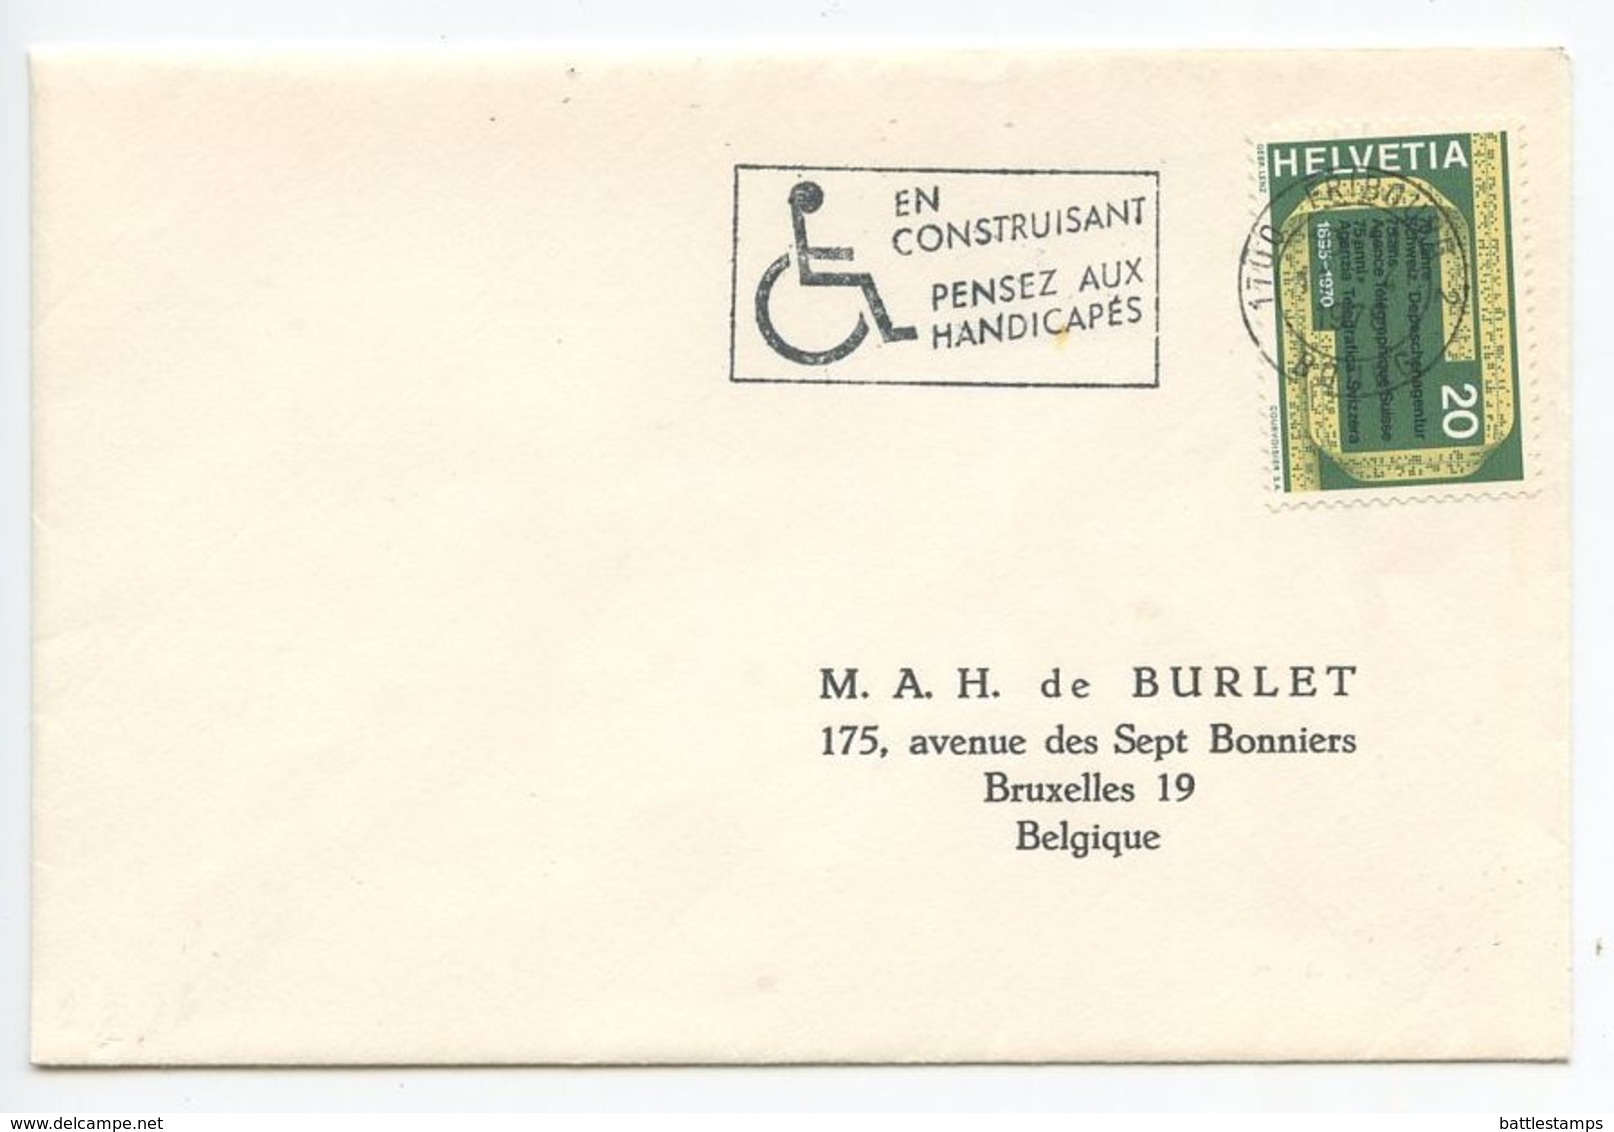 Switzerland 1976 Cover Fribourg To Bruxelles, Belgium W/ Handicapped Slogan Cancel - Covers & Documents